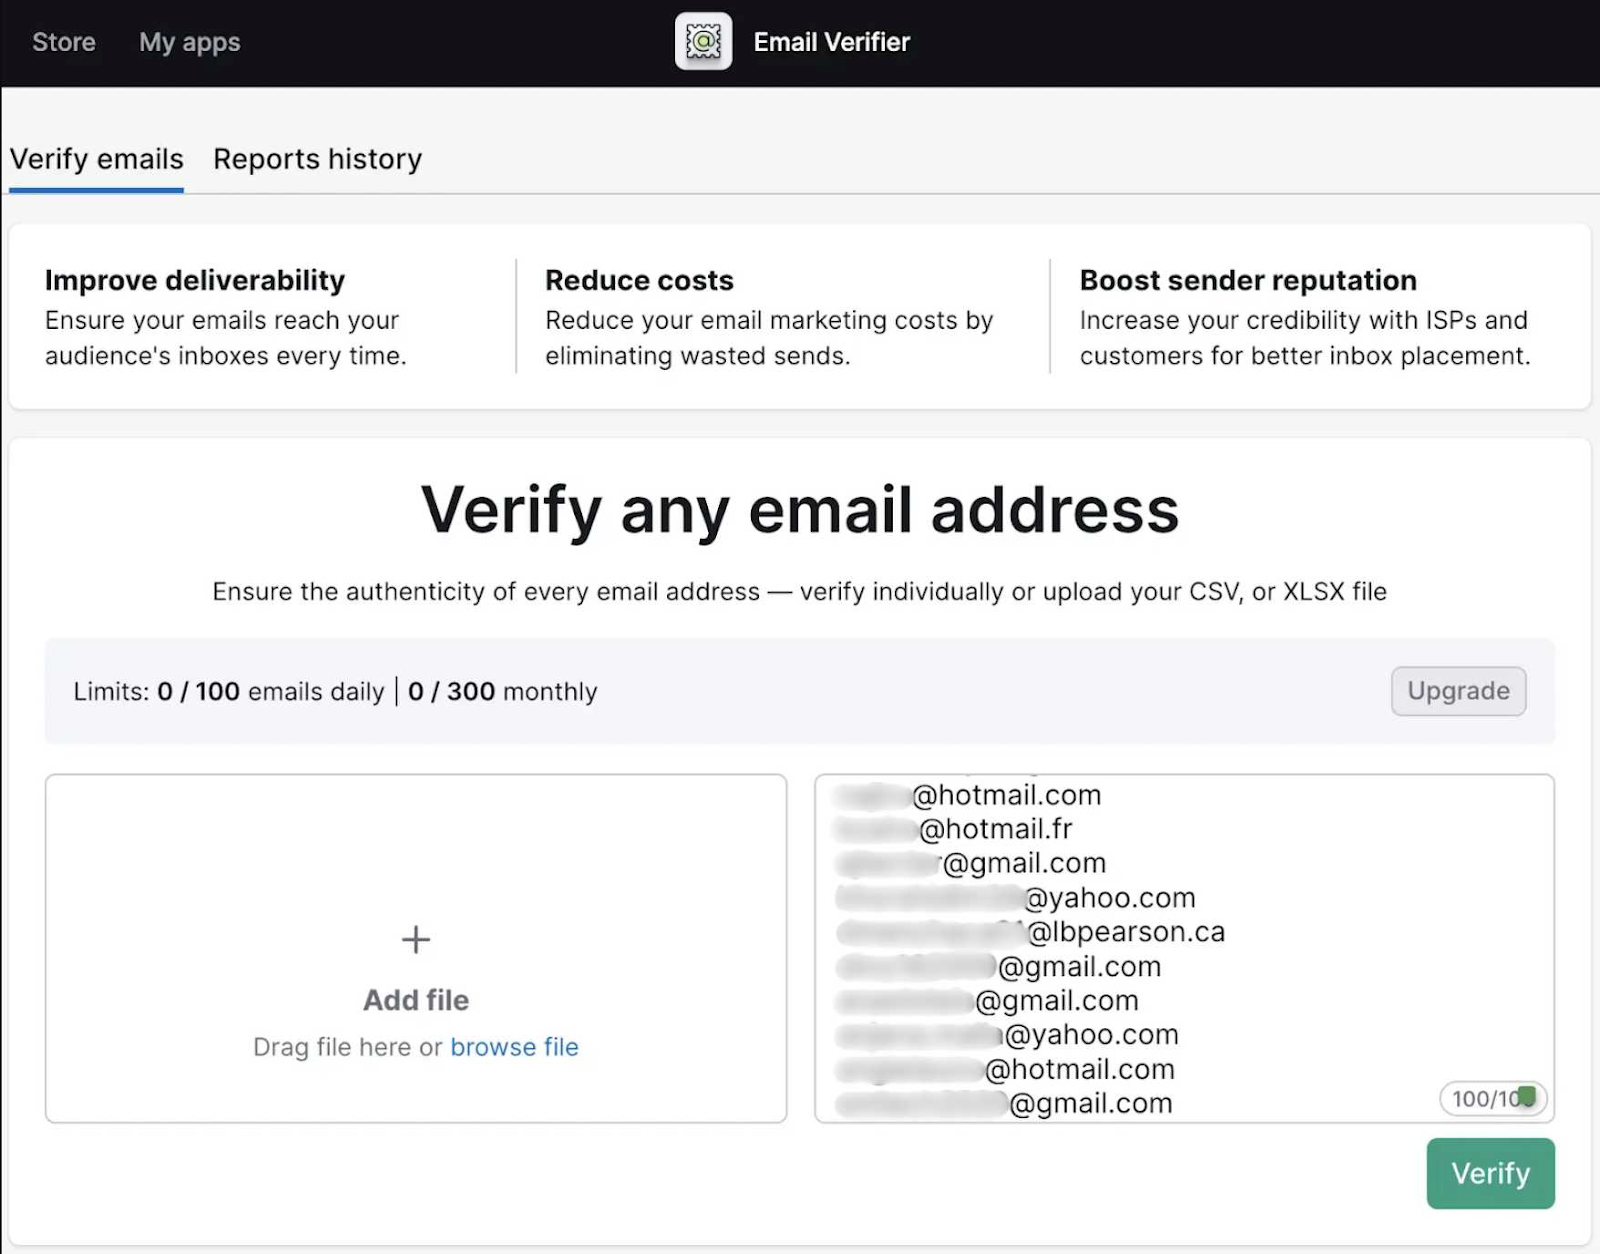 Email Verifier tool showing the ability to bulk verify email addresses.